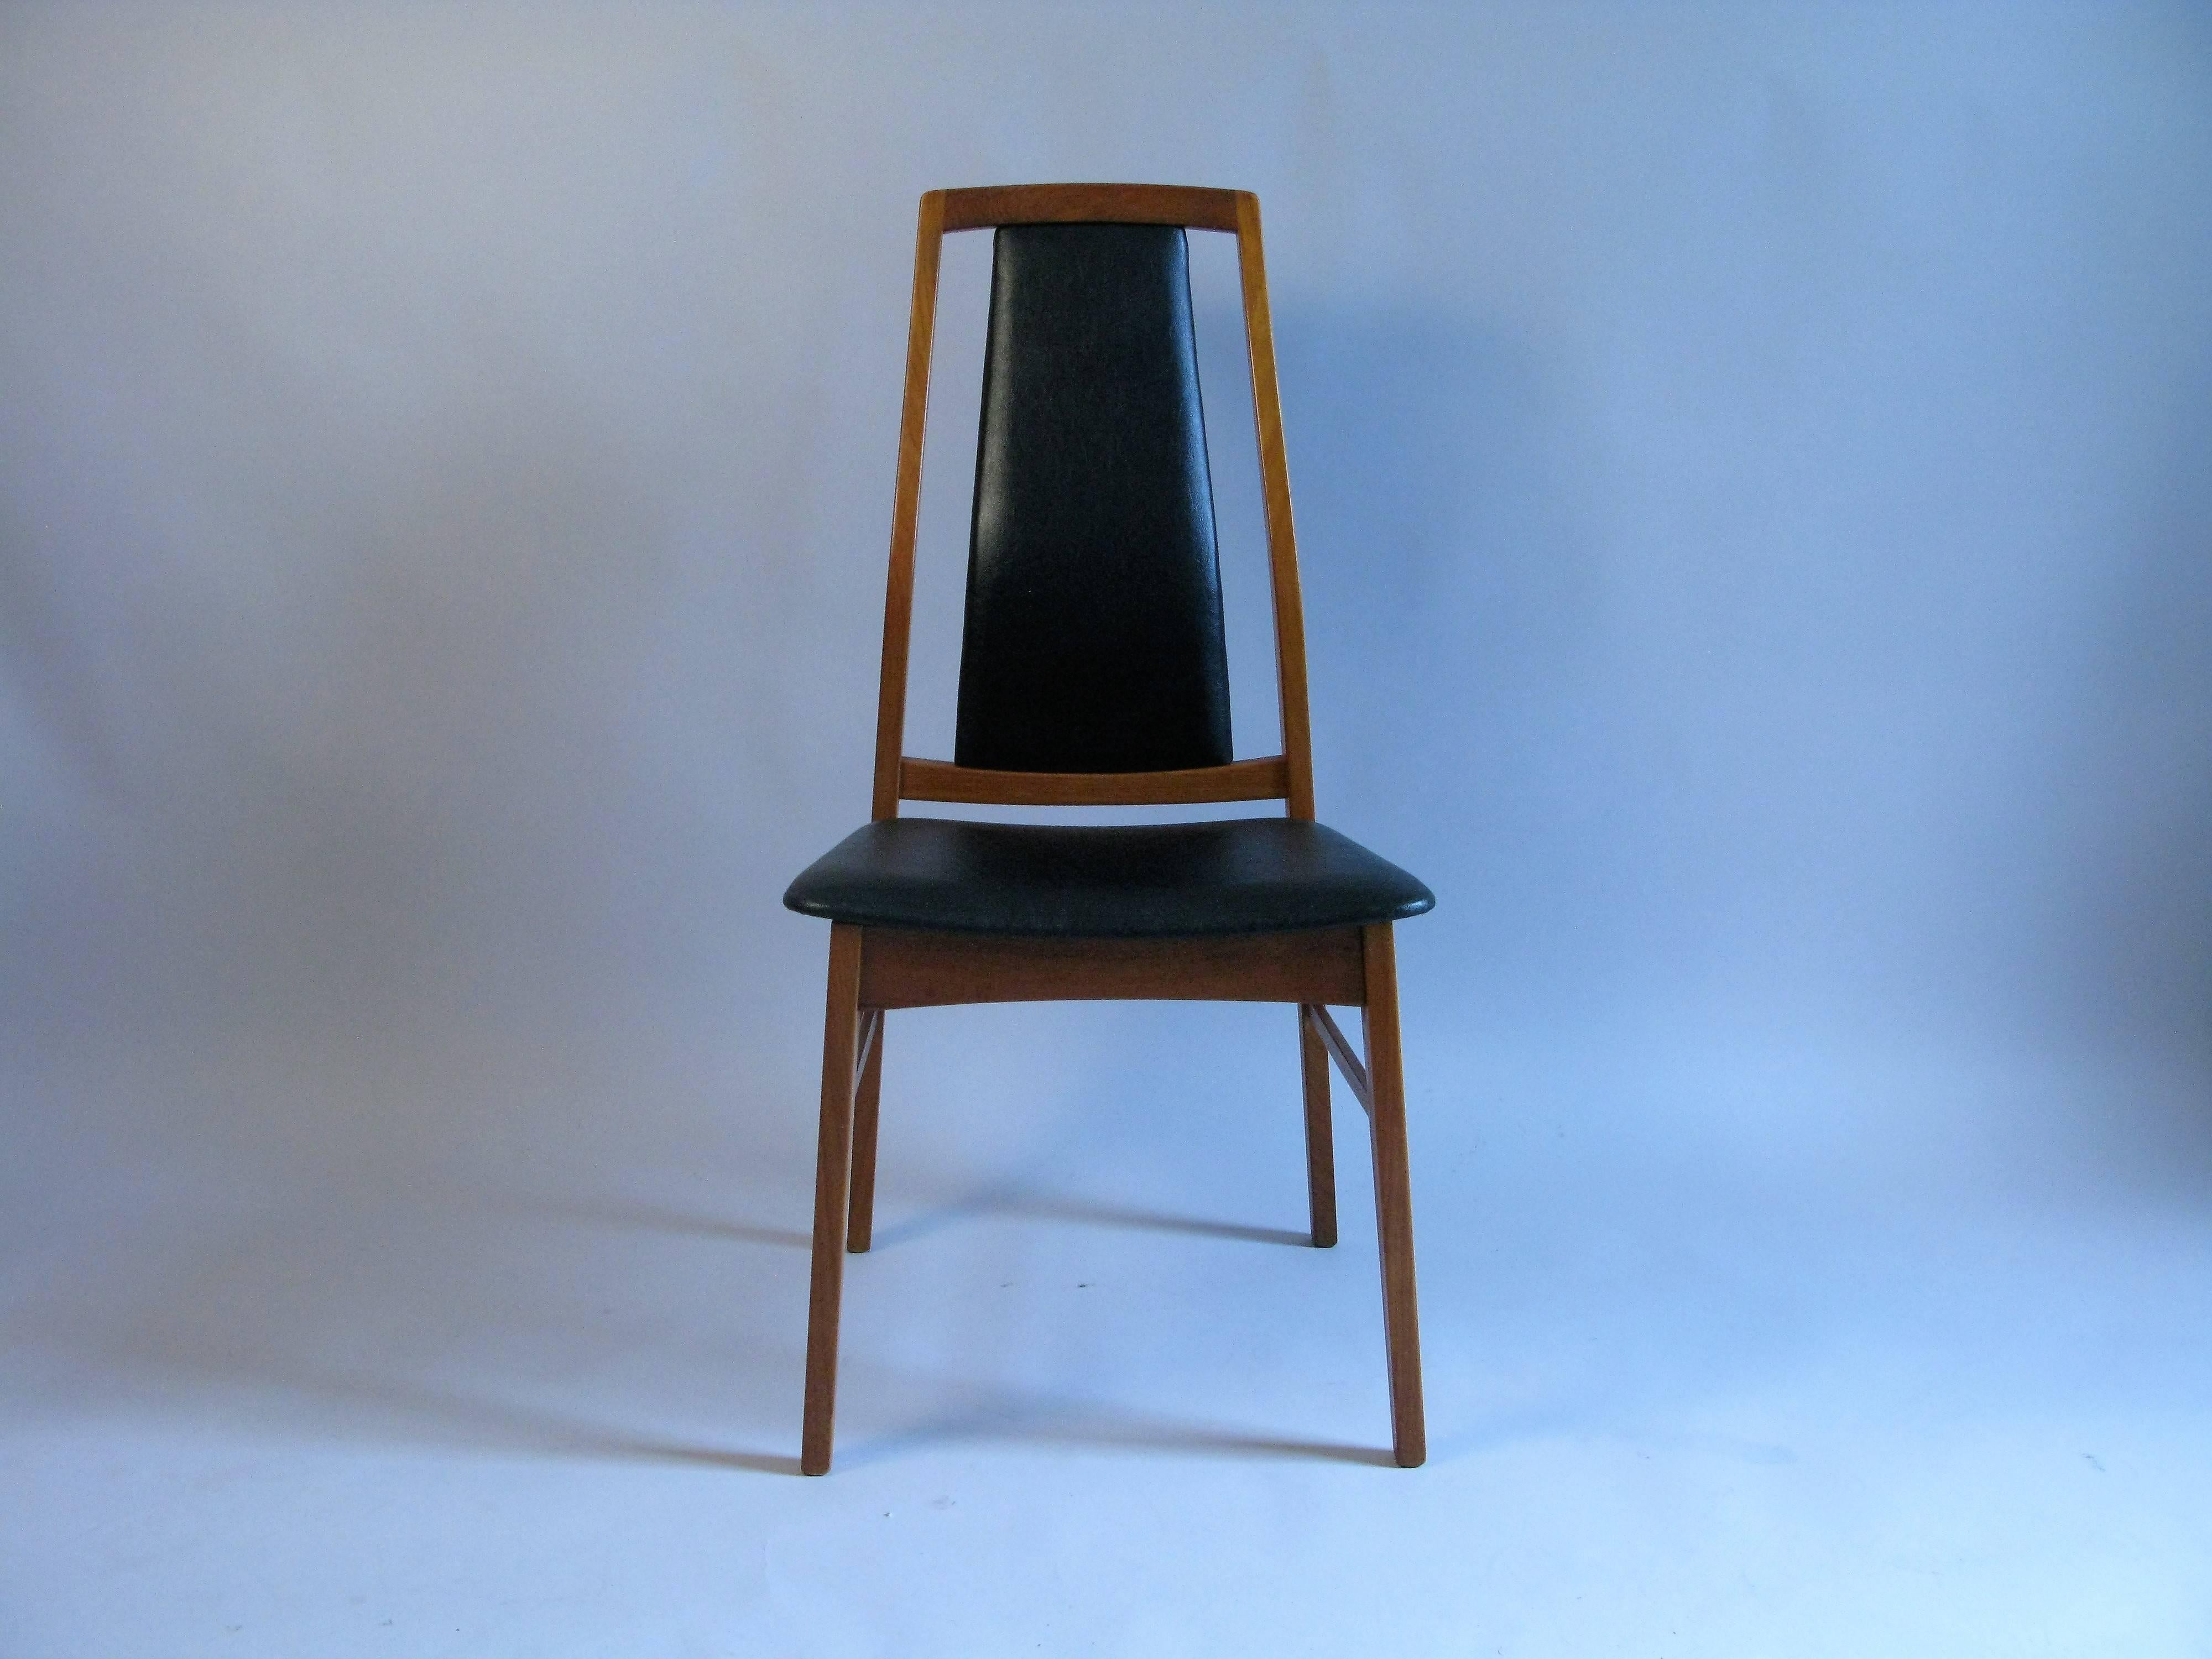 Handsome set of Danish teak dining chairs from 1970. Original upholstery is in excellent condition.